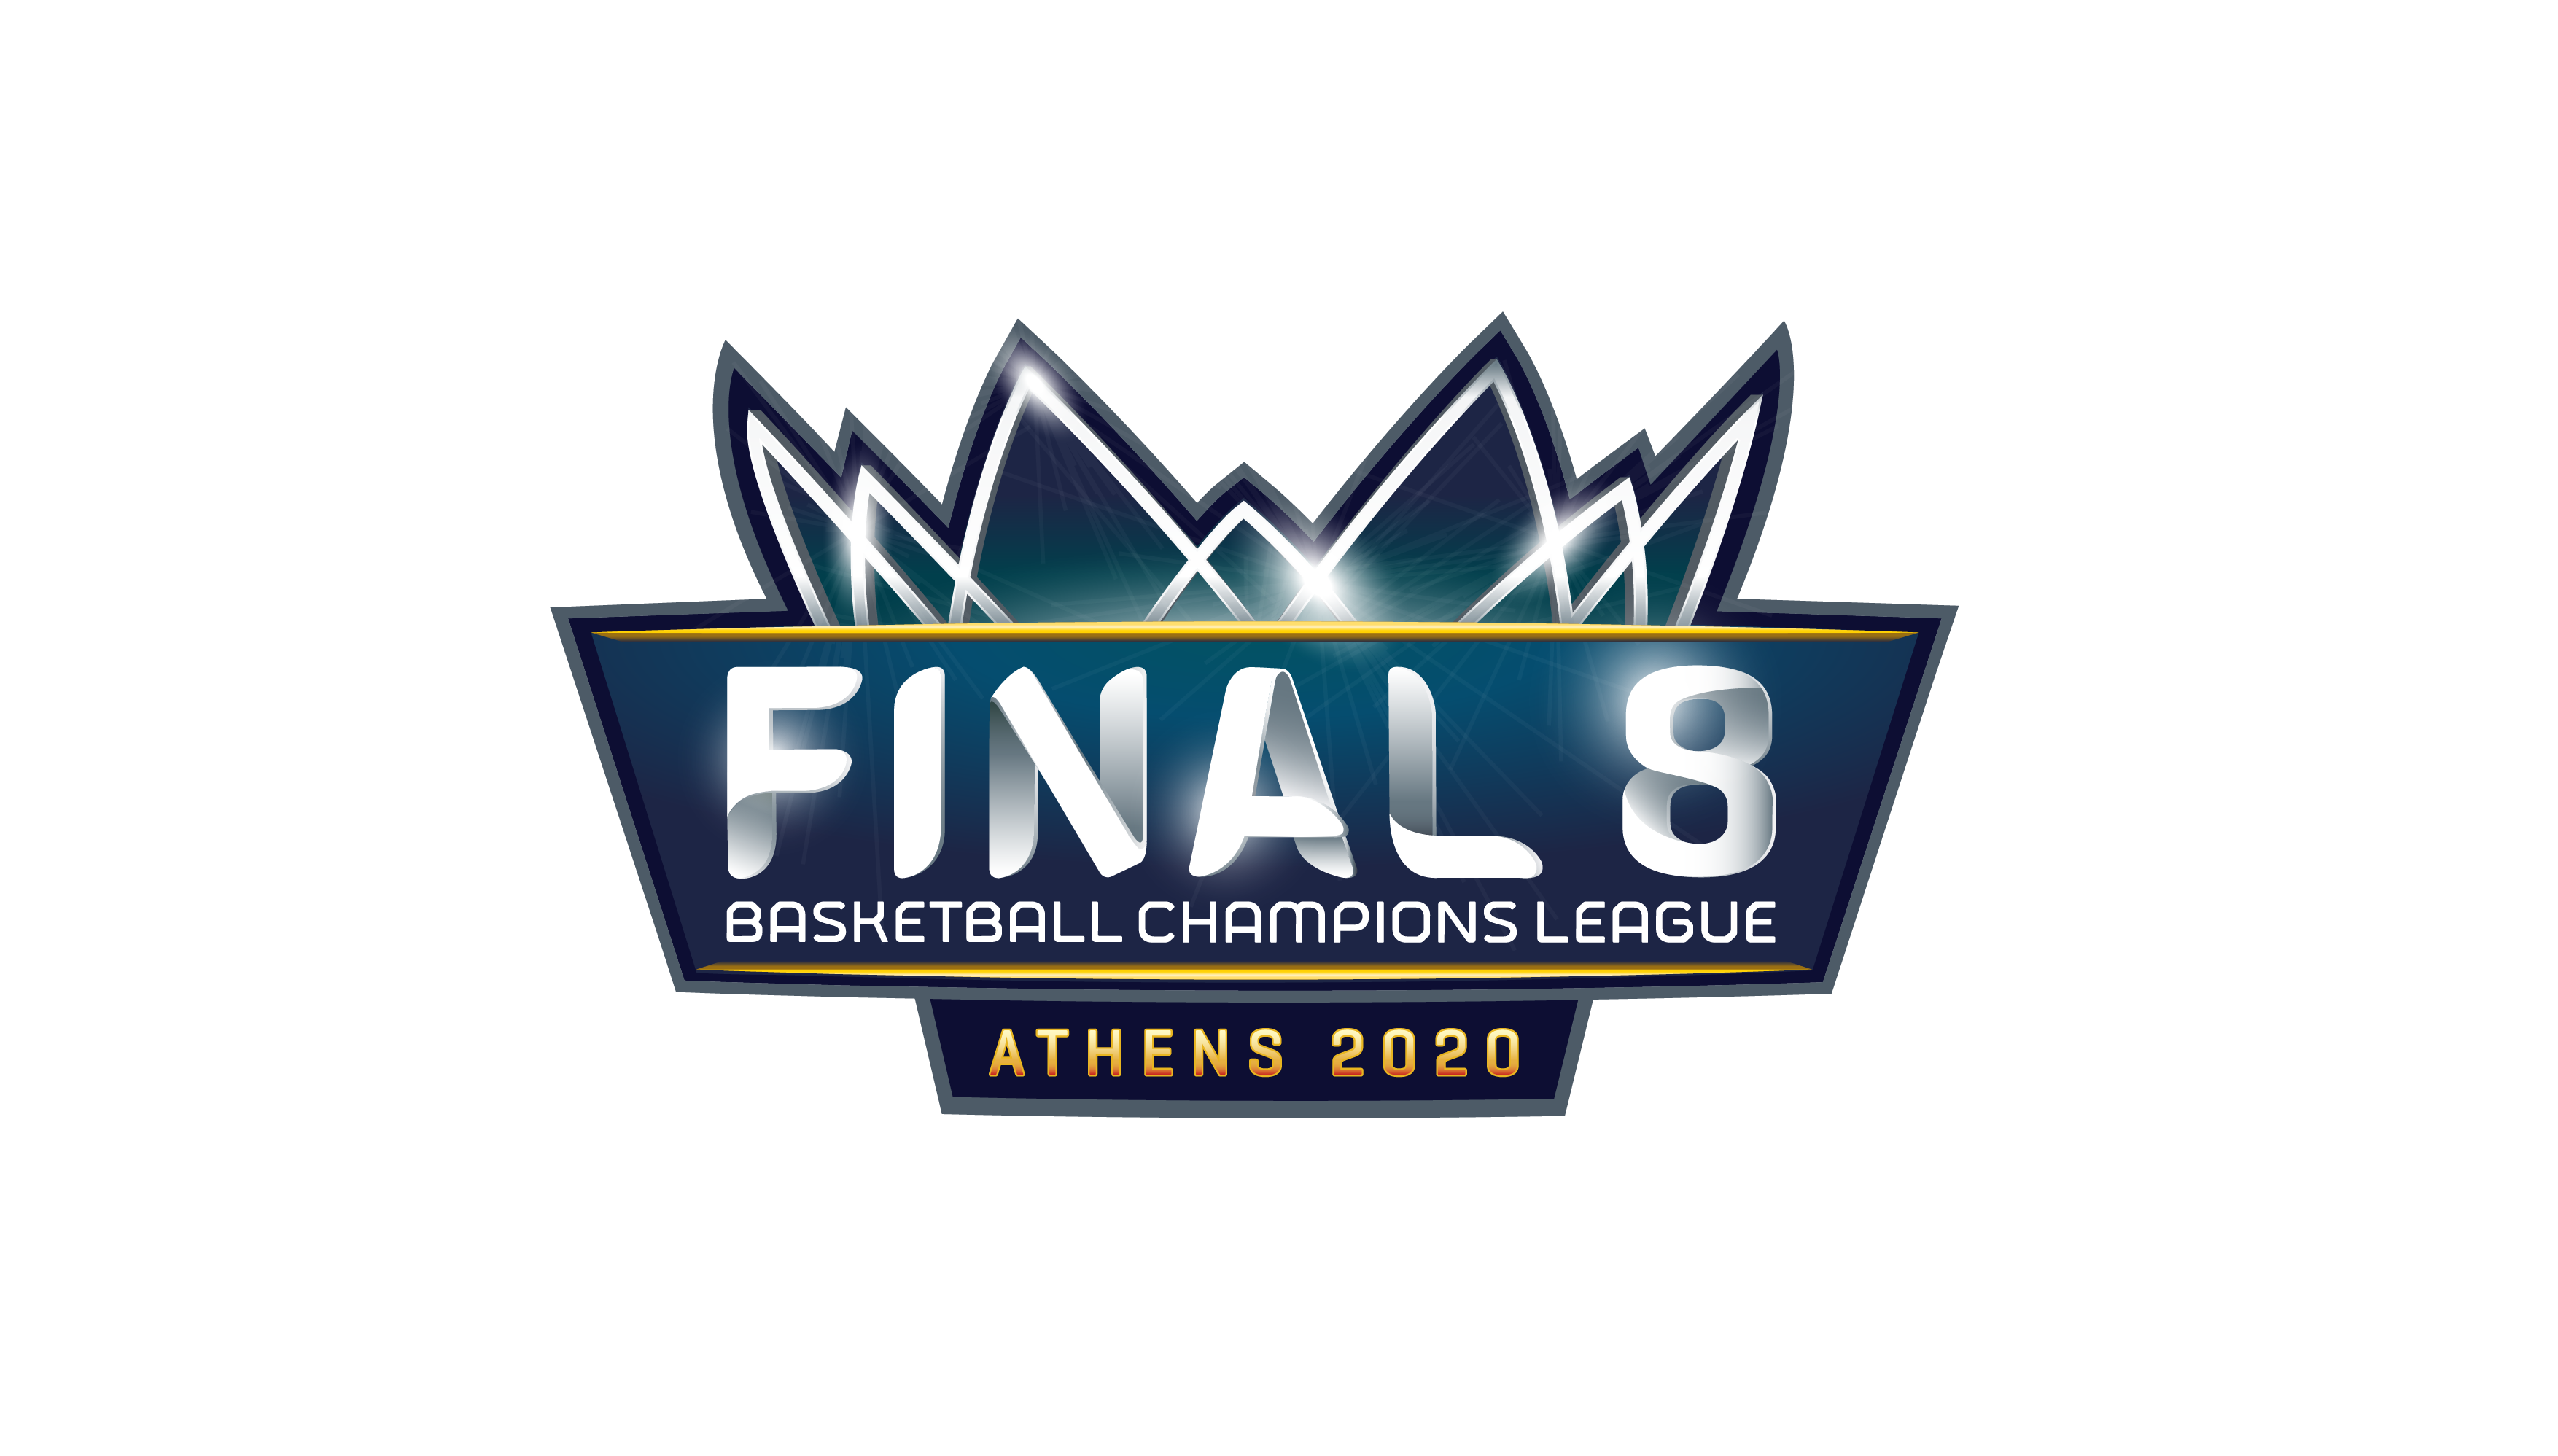 Athens to host Basketball Champions League Final Eight